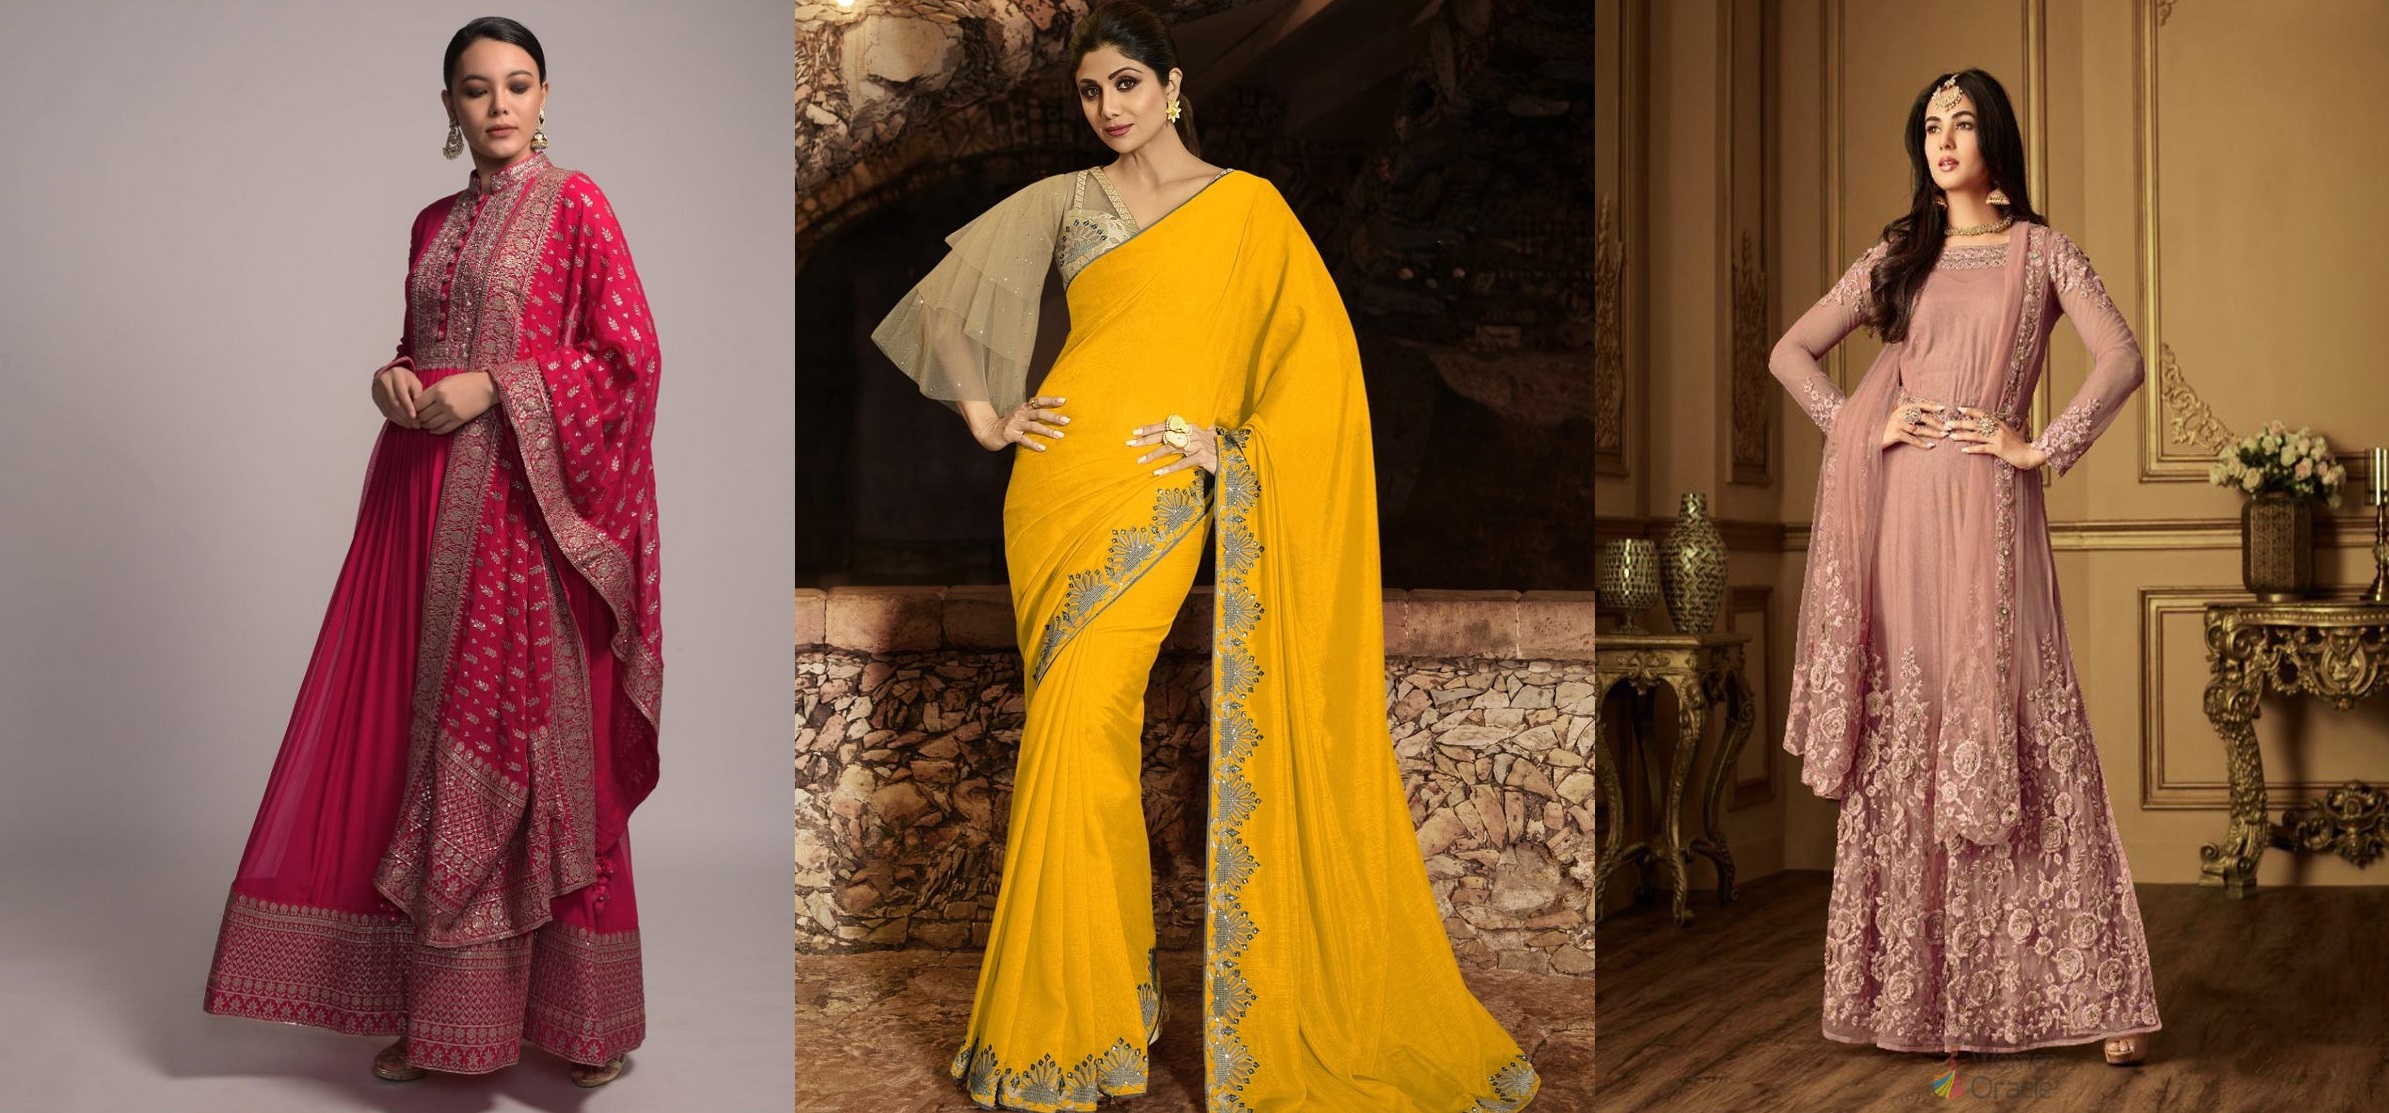 Top 9 Diwali Outfit Ideas Every Woman ...